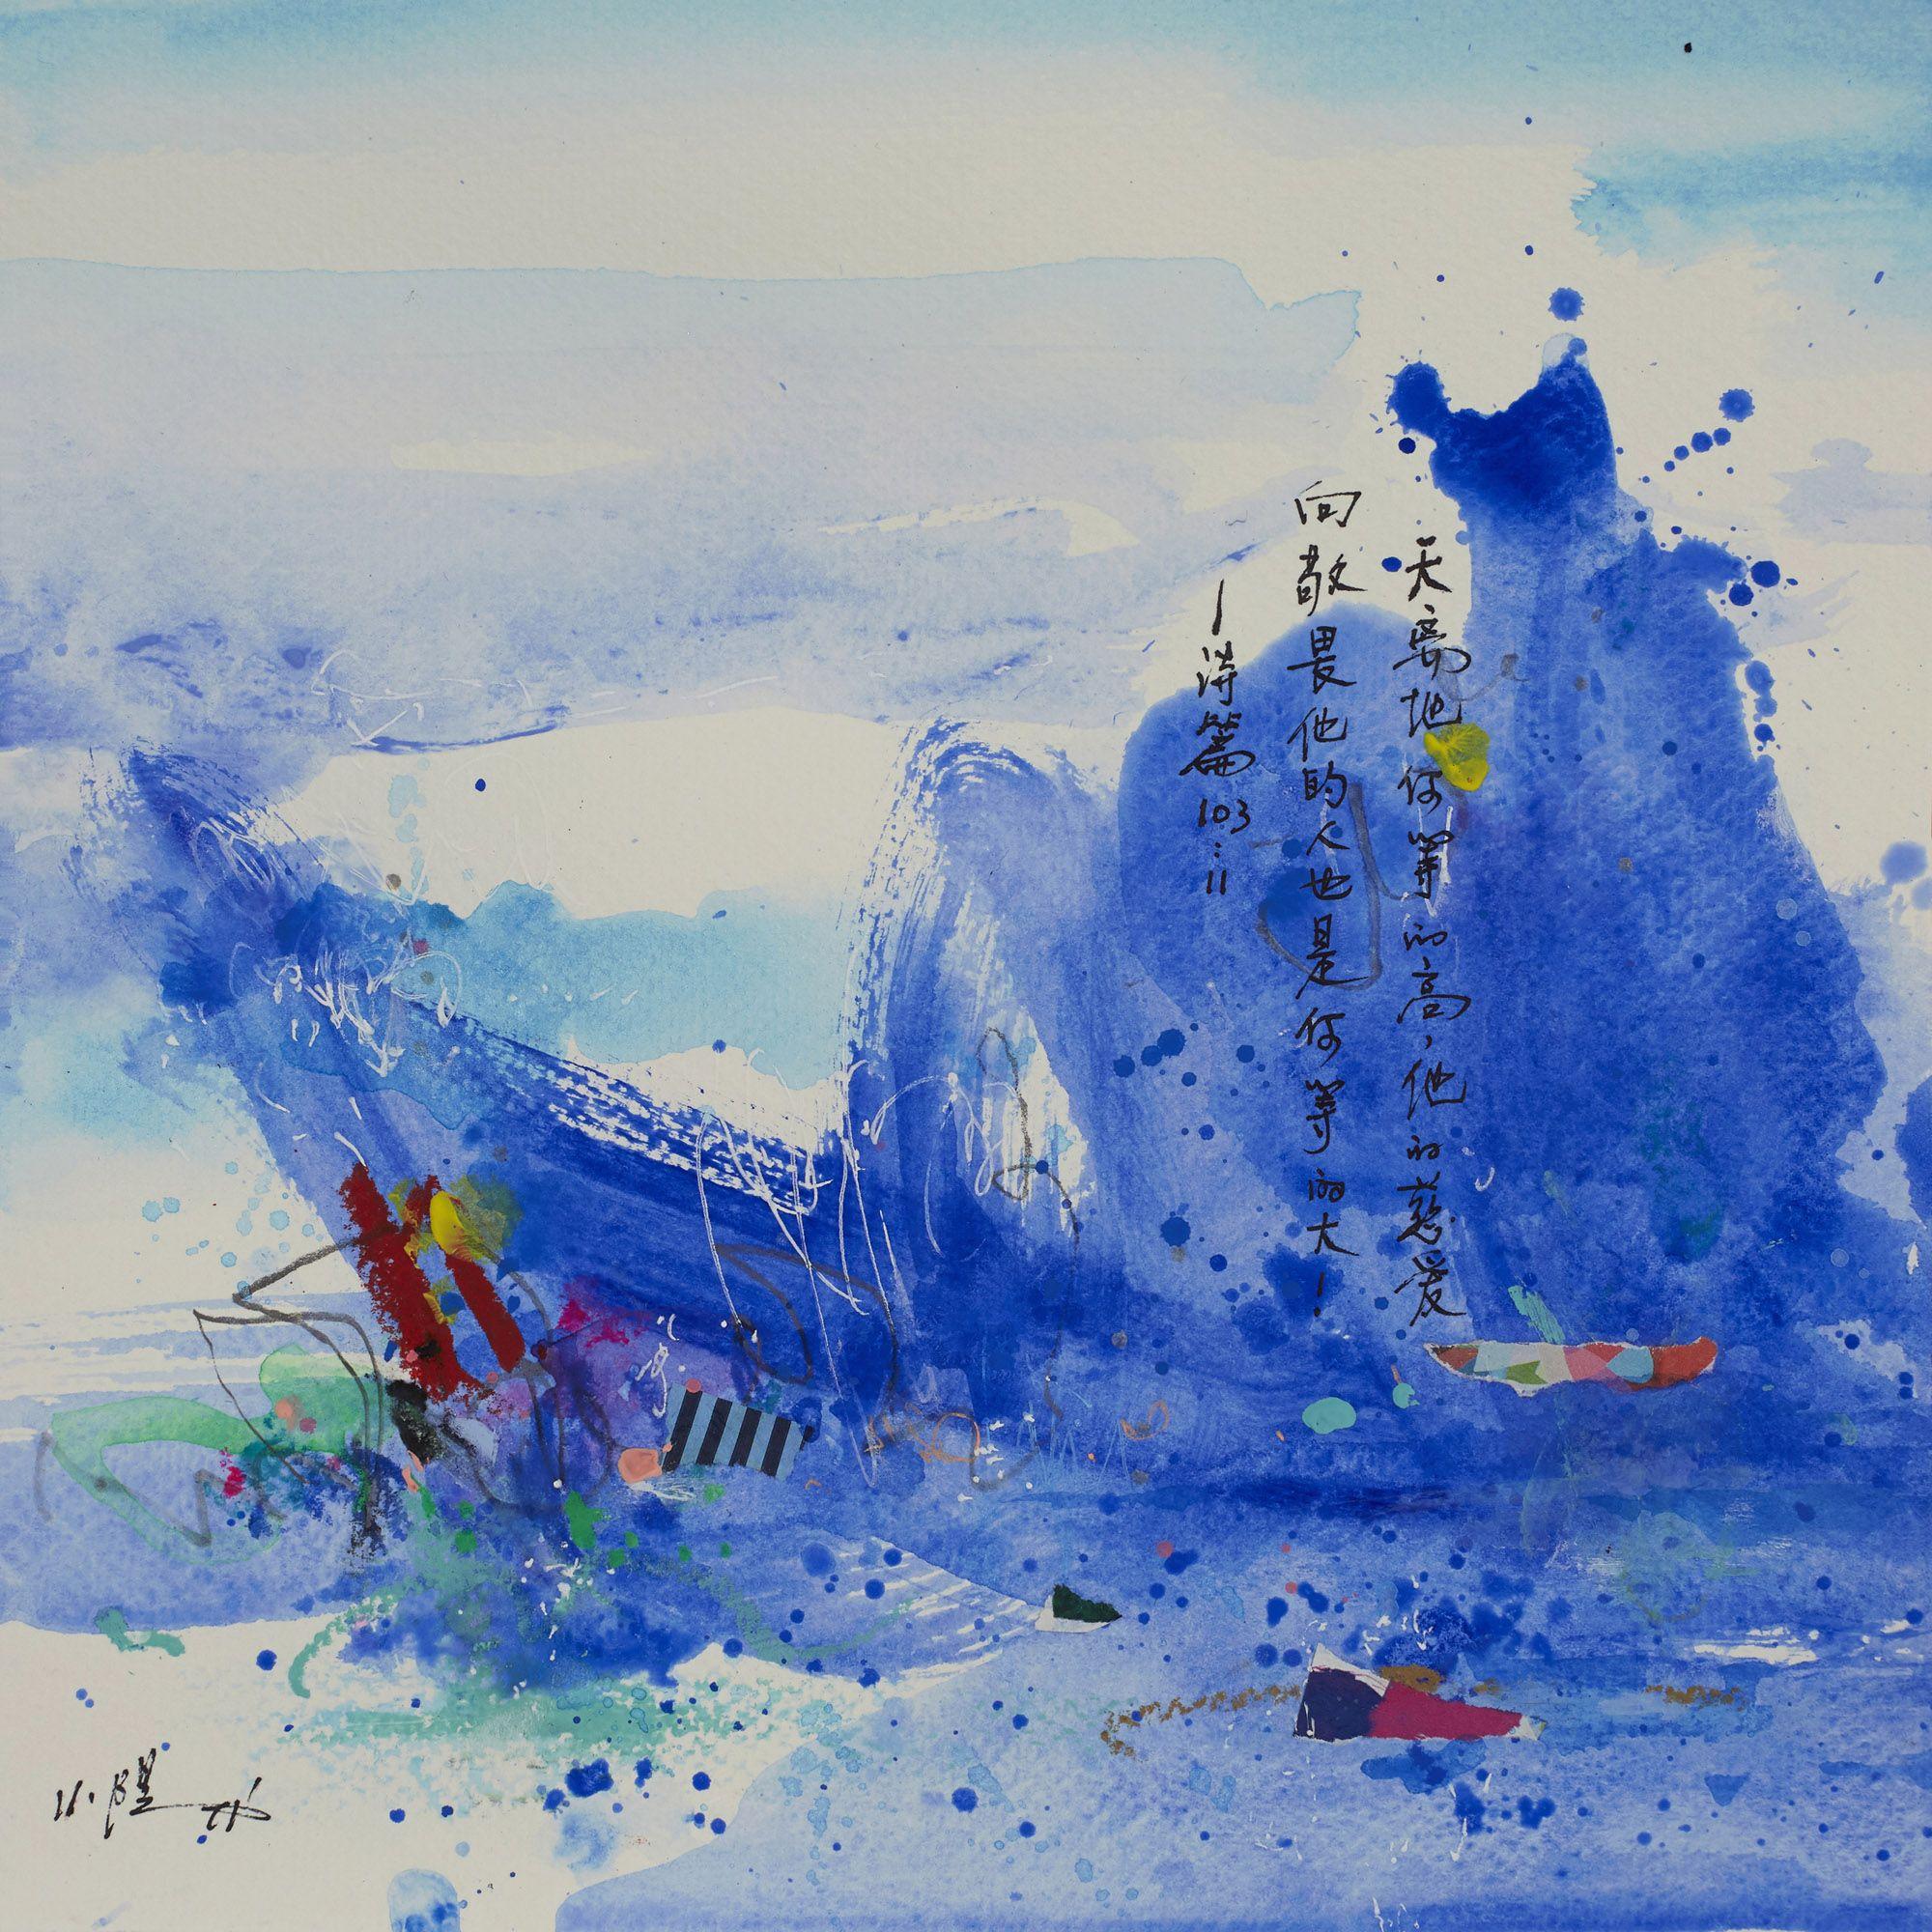 Ocean, Painting, Acrylic on Paper - Blue Abstract Painting by Xiaoyang Galas